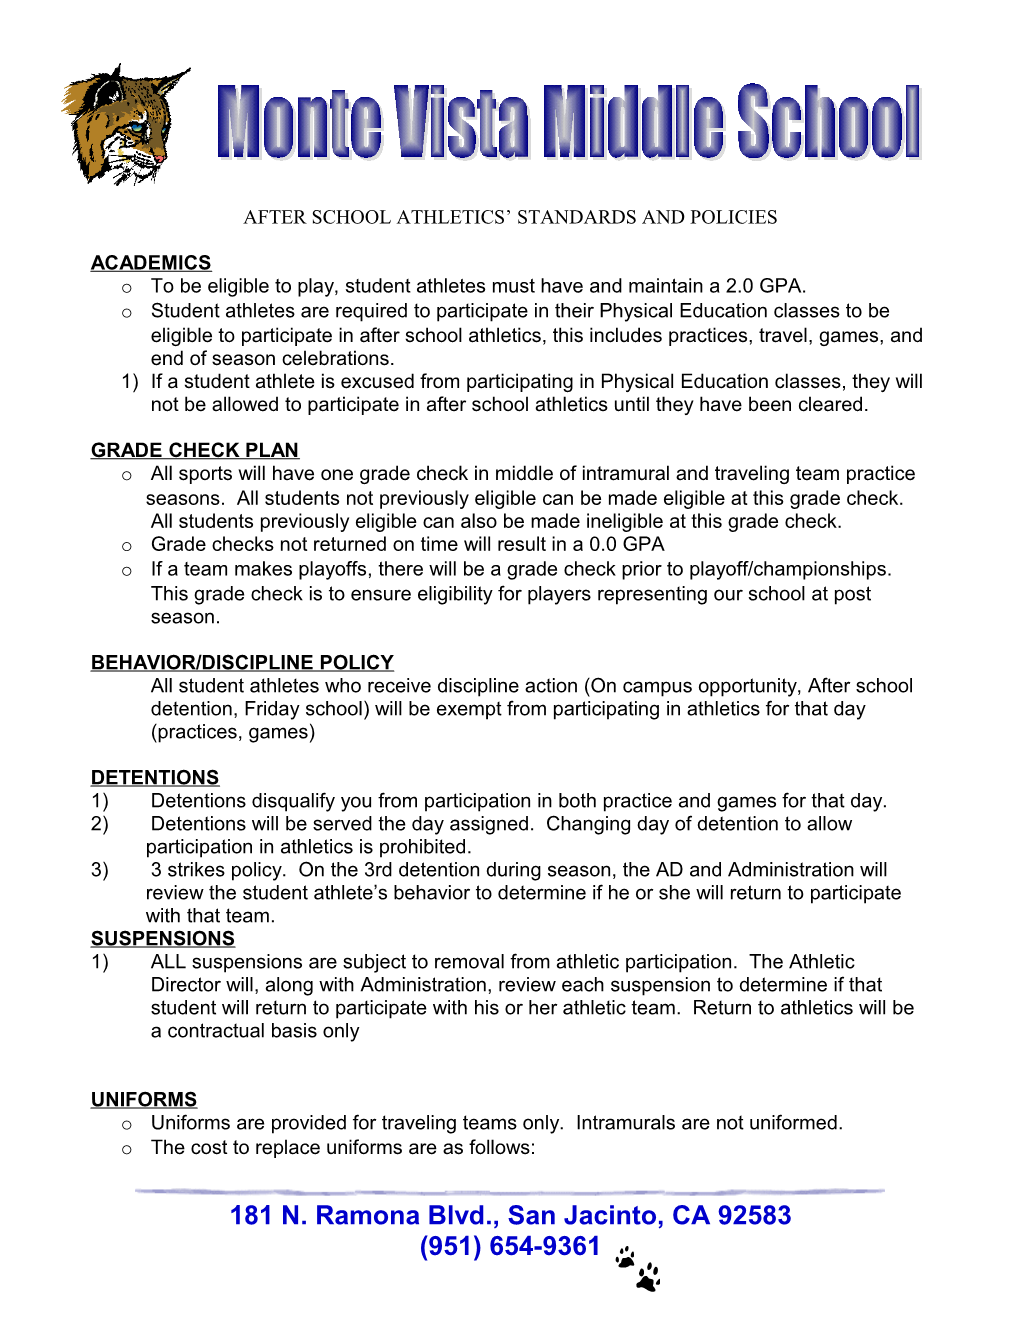 After School Athletics Standards and Policies